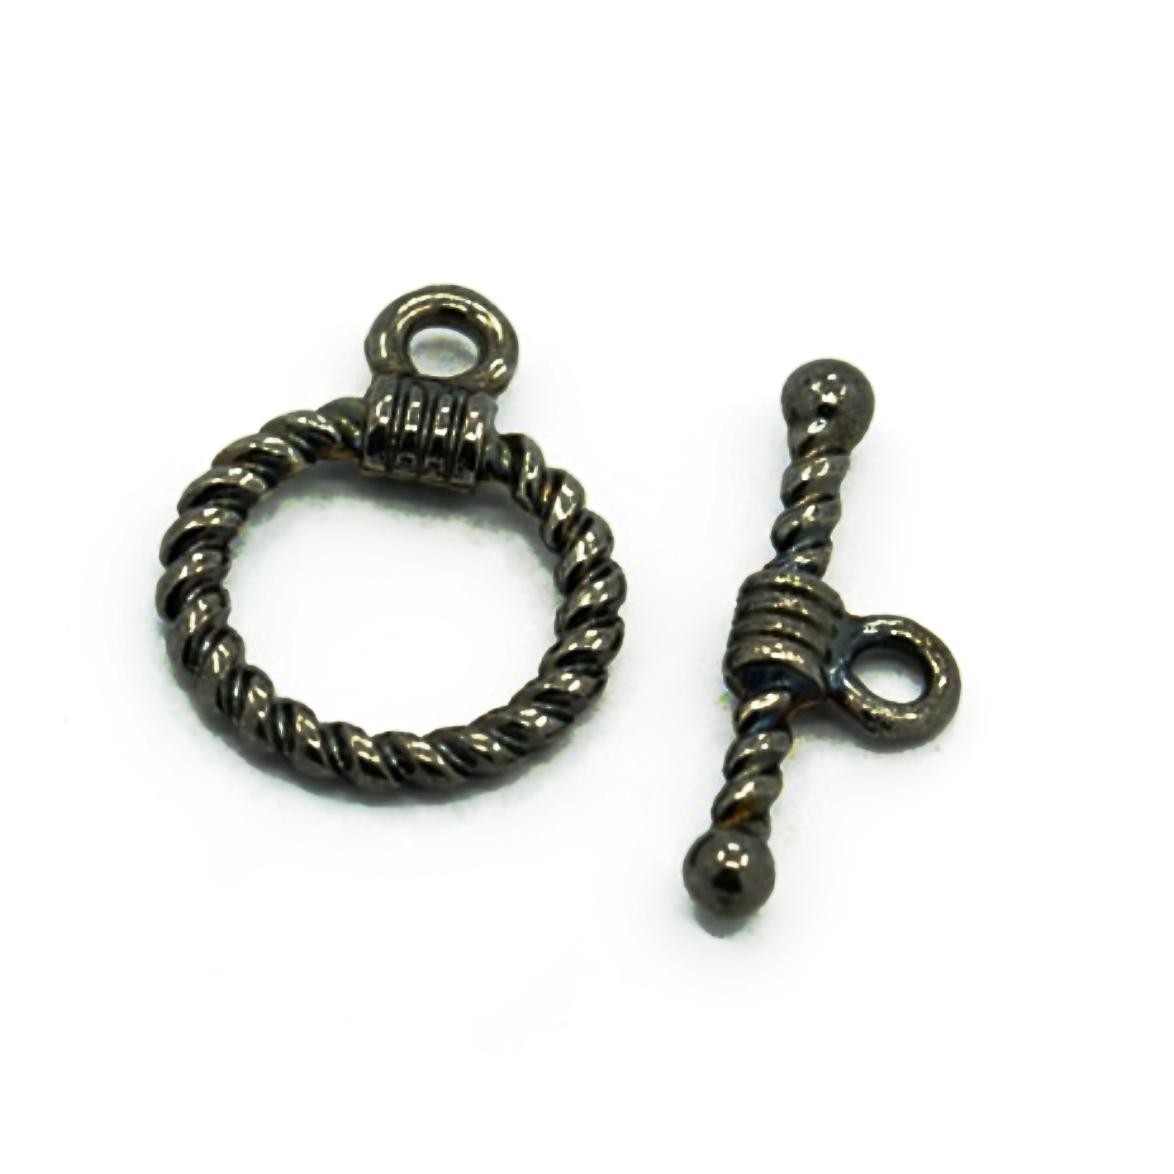 Antique Gunmetal, Twisted Wire Bali Style Toggle Clasp, 19x14mm Ring, 20mm Bar, x10 clasp sets